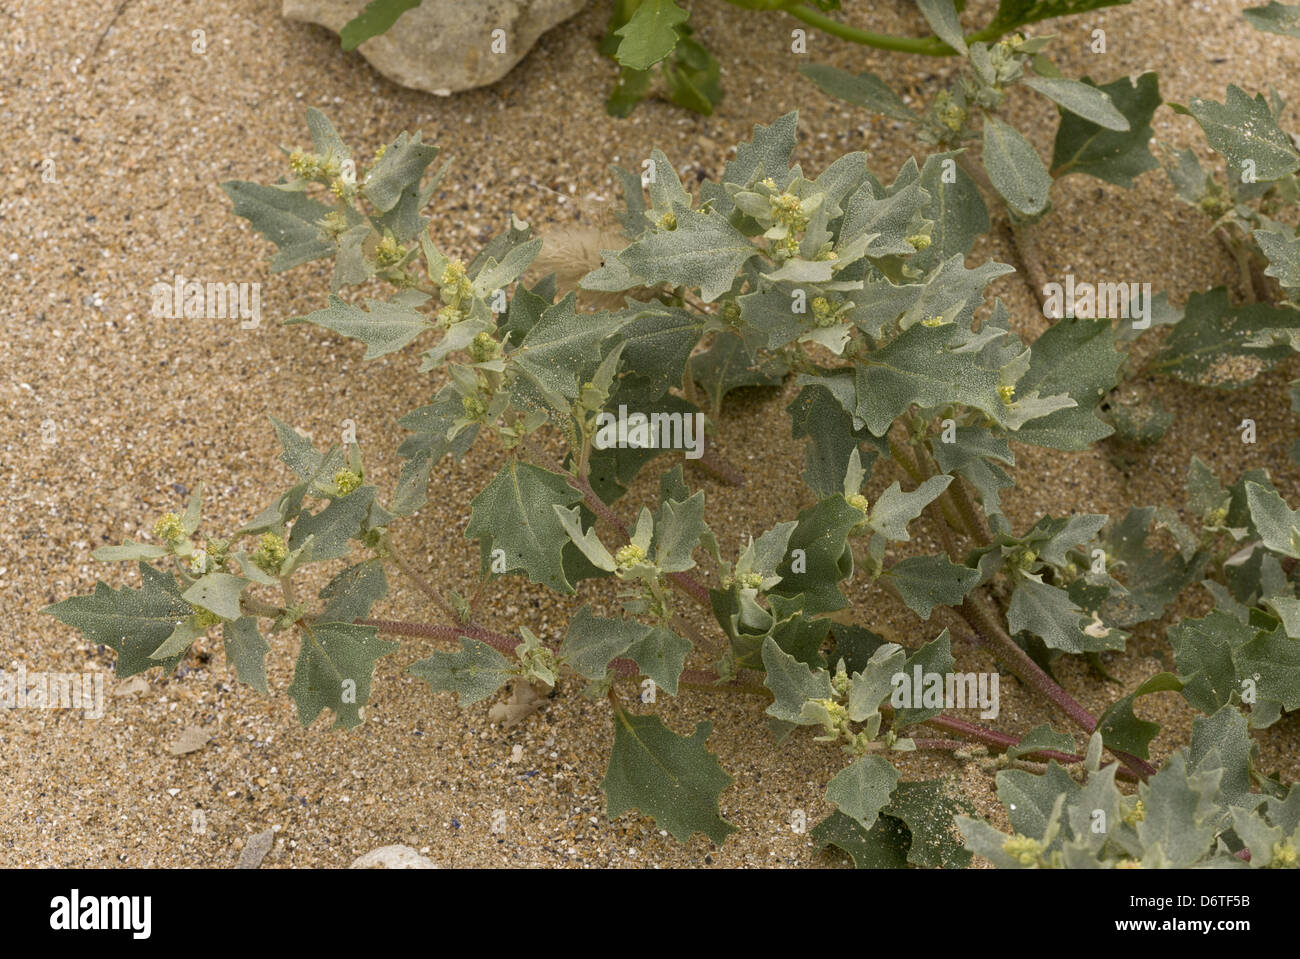 Frosted Orache (Atriplex laciniata) flowering, growing at tideline on sandy shore, August Stock Photo